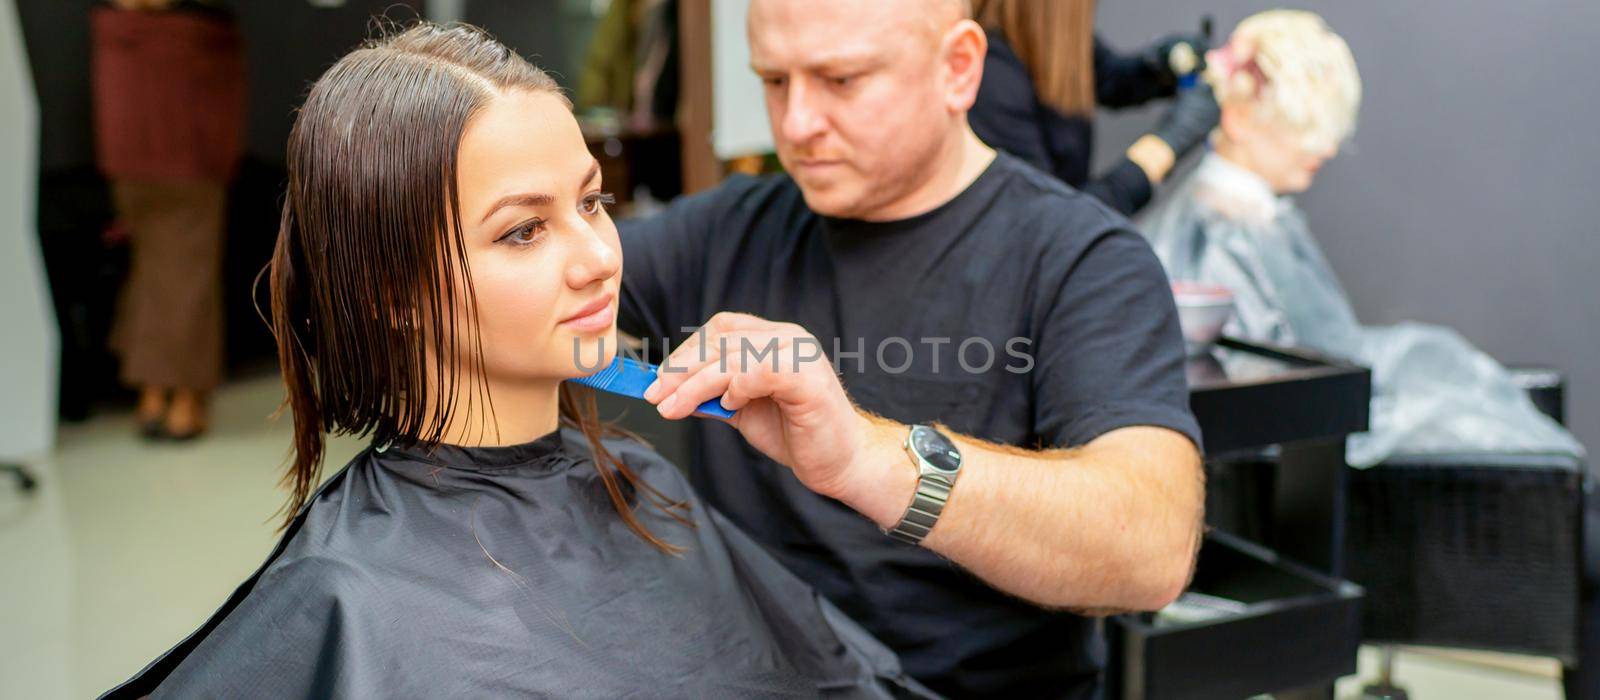 Haircut of long wet hair of young caucasian woman by a male hairdresser in a hair salon. by okskukuruza